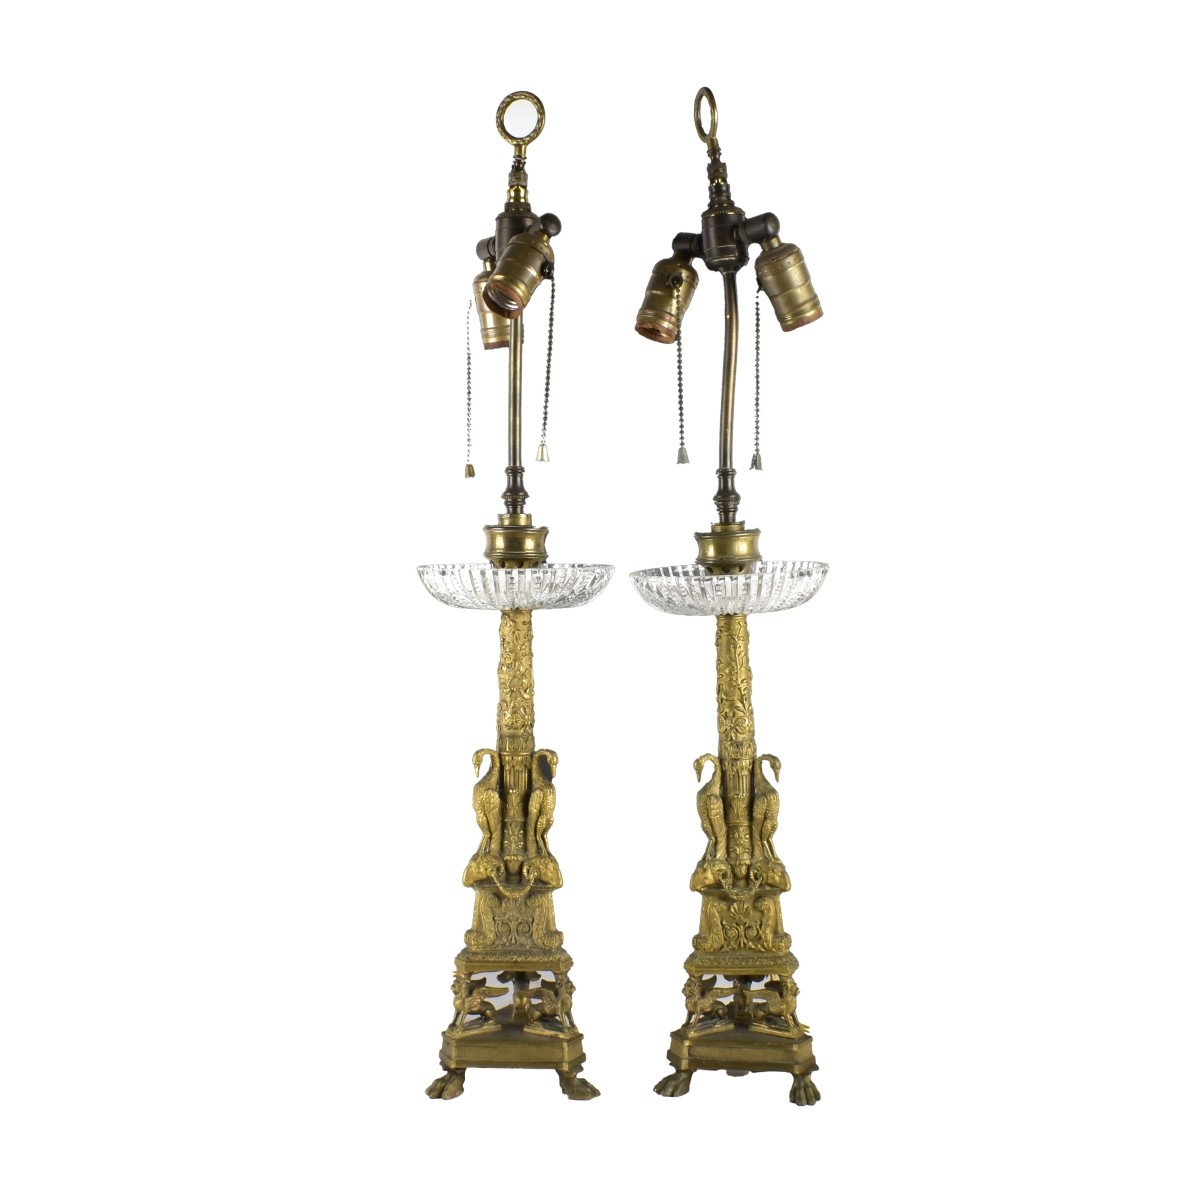 Pair of French Empire Style Lamps